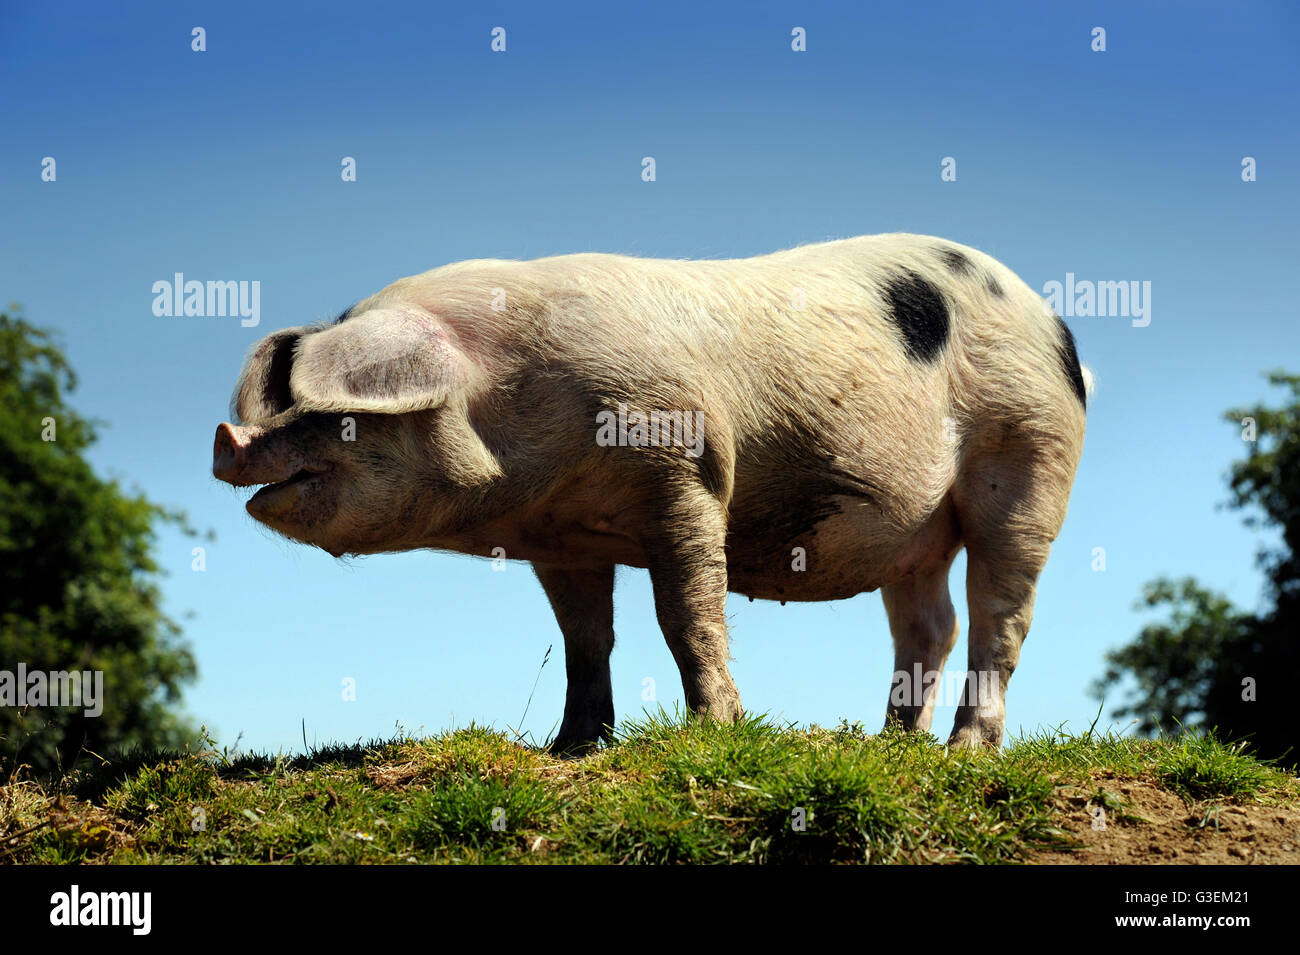 A Gloucester Old Spot pig on a hot day near Cirencester, Gloucestershire UK Stock Photo